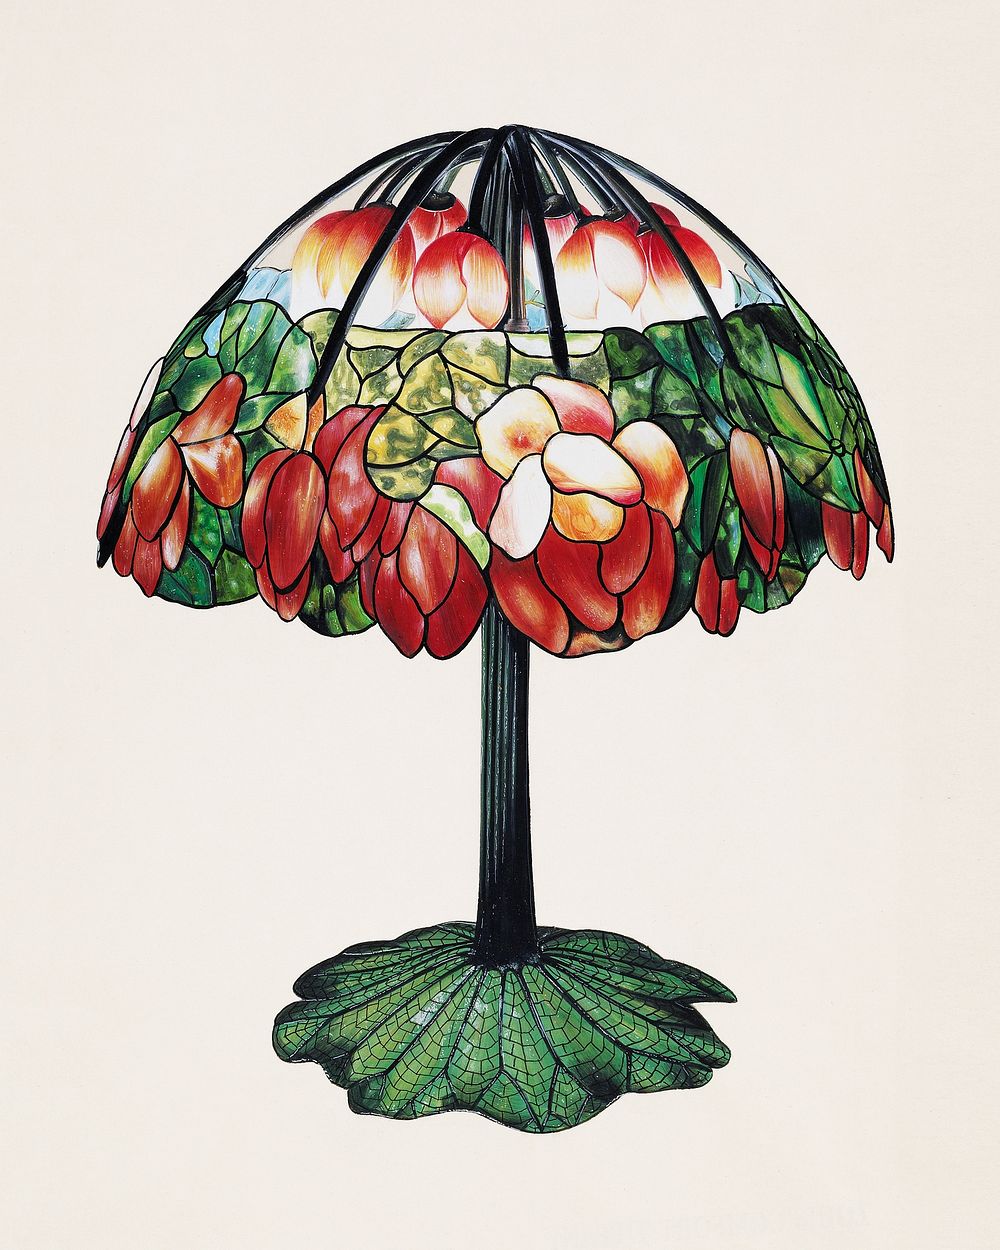 Design for a Lamp by Louis Comfort Tiffany. Original public domain image from the Minneapolis Institute of Art. Digitally…